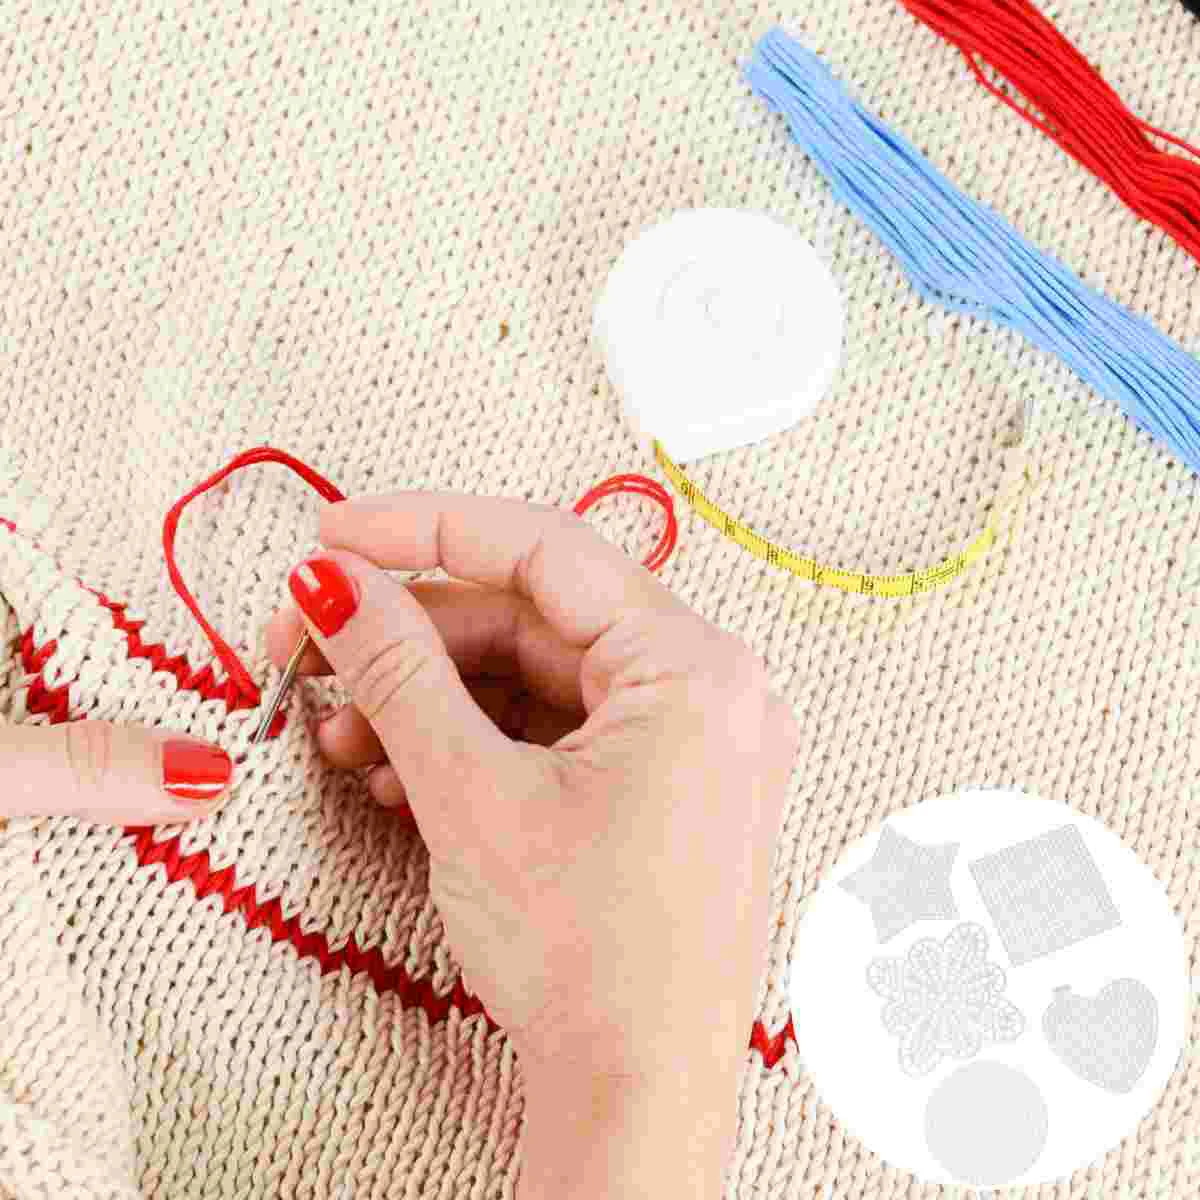 

Canvas Plastic Mesh Sheets Embroidery Cross Sheet Needlepoint Blank Diy Shapes Crochet Clear Making Crafting Cloth Projects